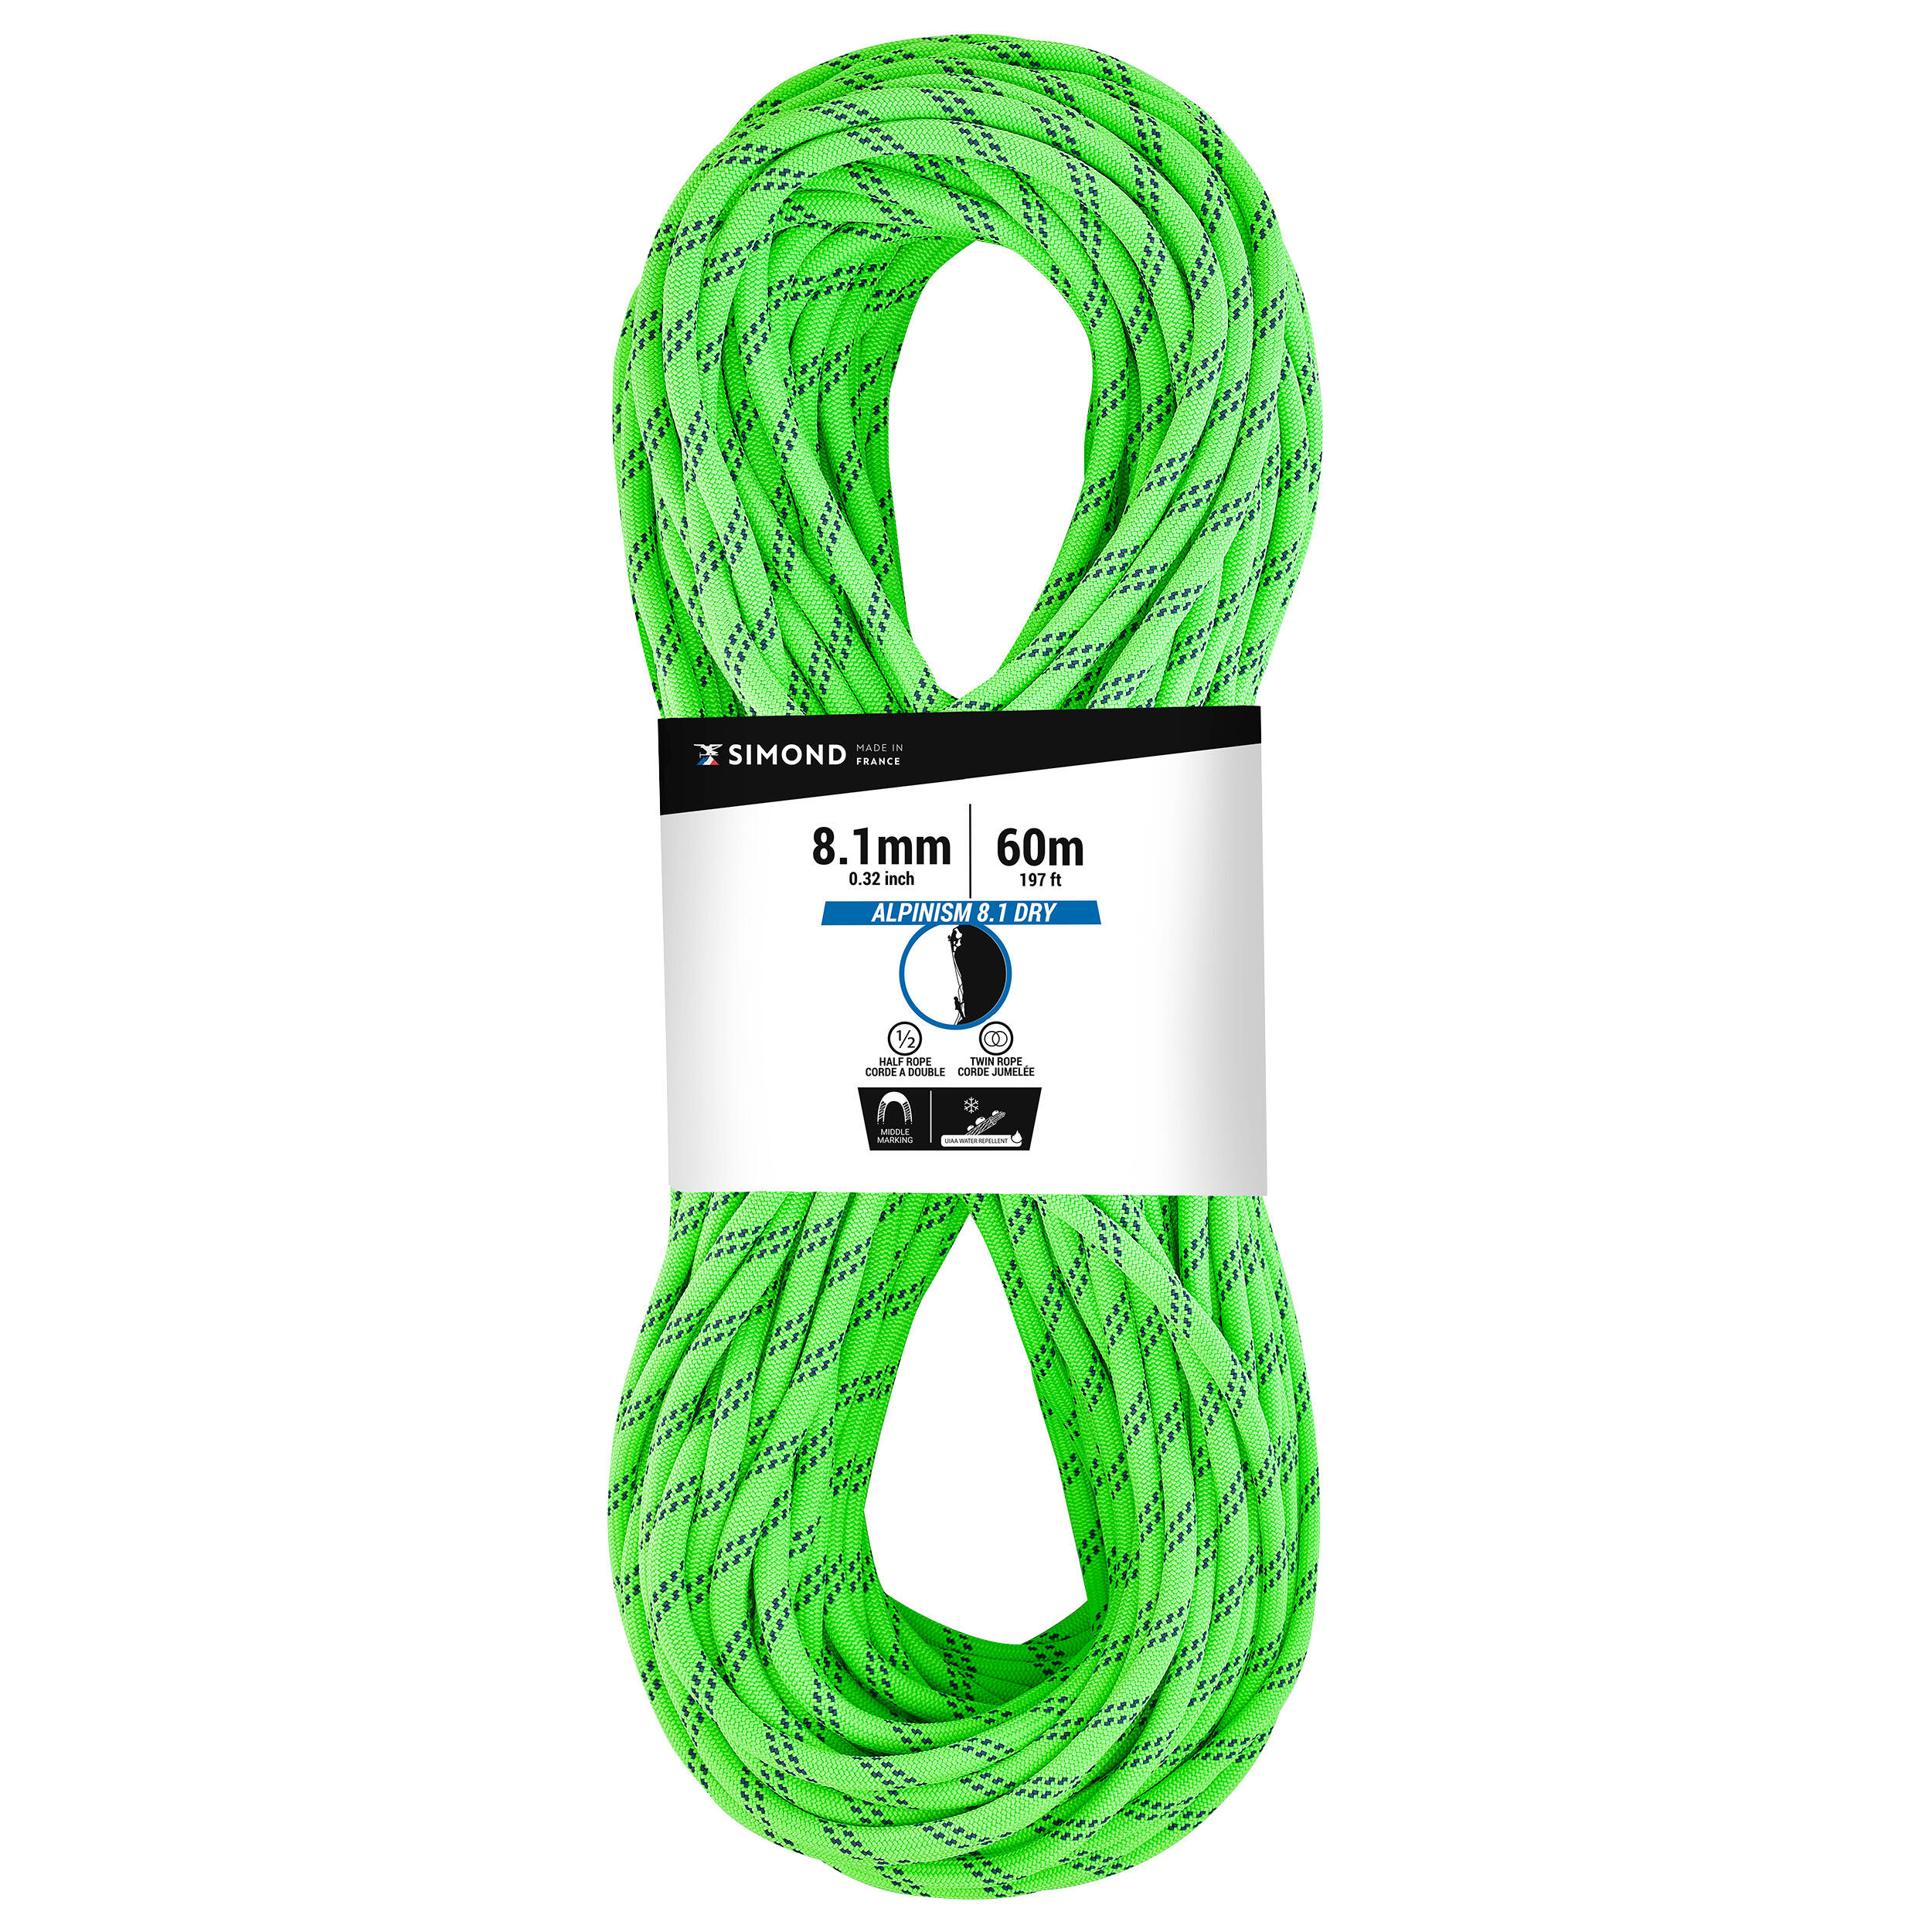 SIMOND MOUNTAINEERING AND CLIMBING HALF ROPE - ABSEIL ALPINISM 8.1 MM X 60M GREEN